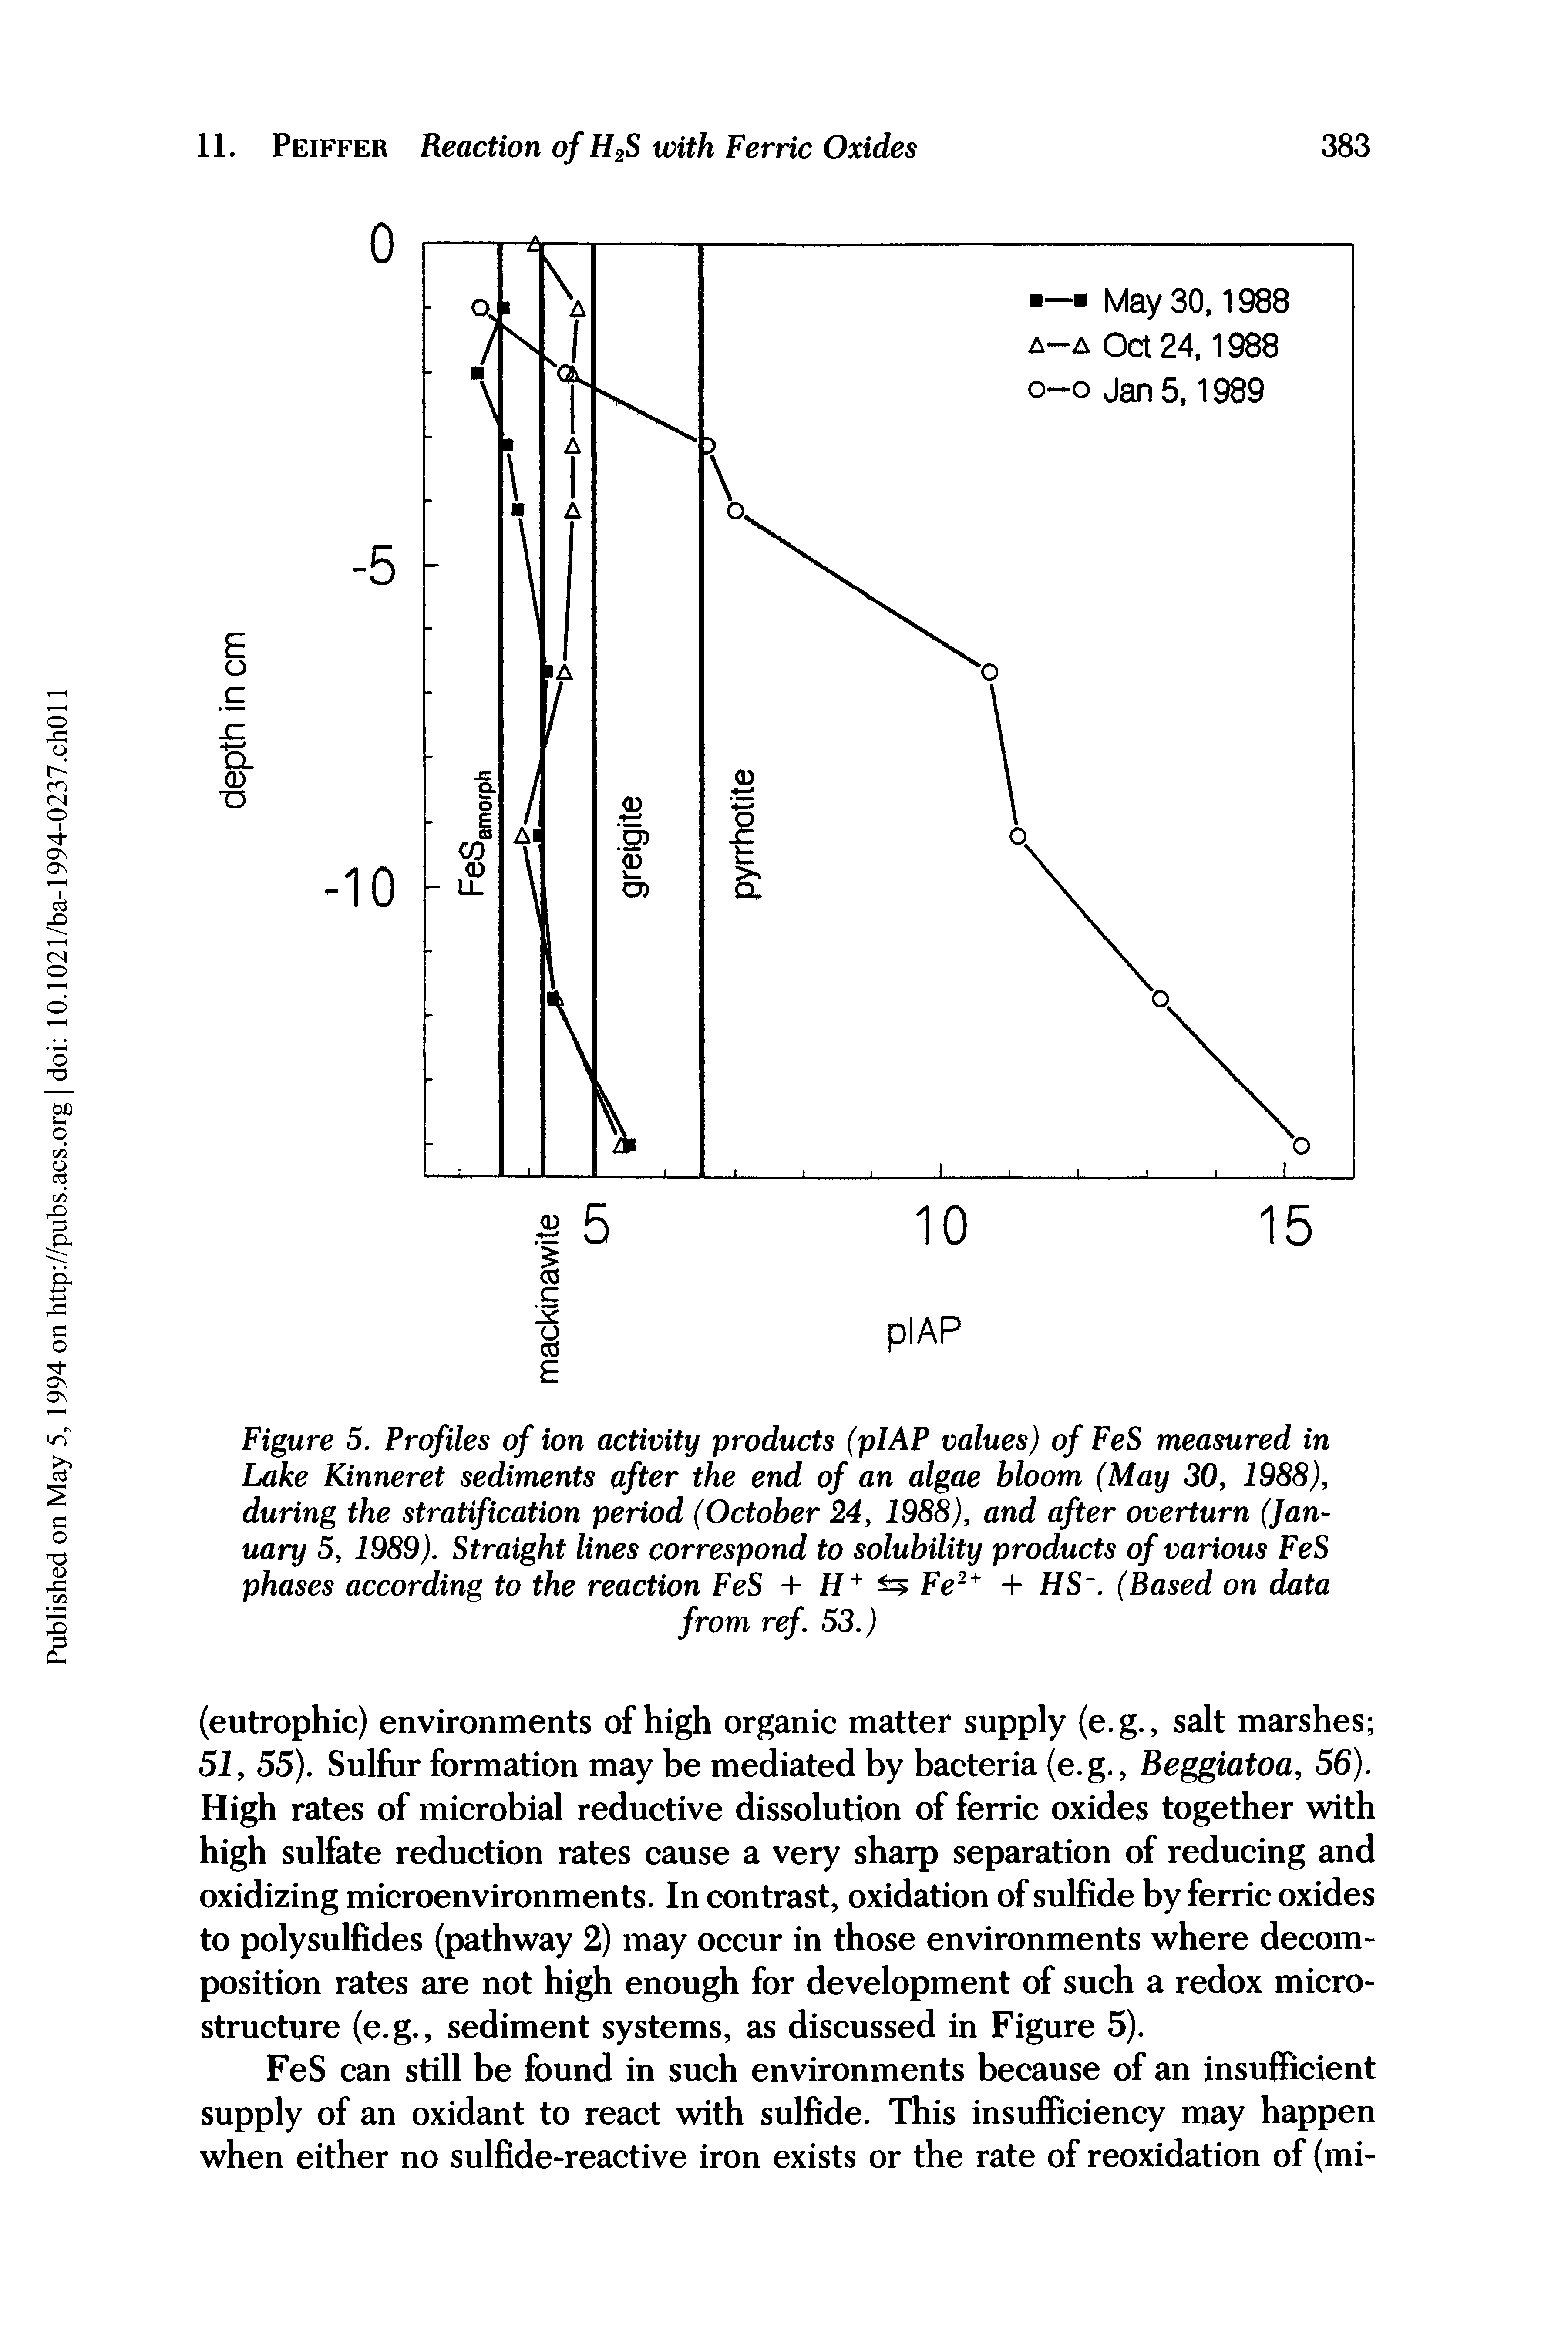 Figure 5. Profiles of ion activity products (pIAP values) of FeS measured in Lake Kinneret sediments after the end of an algae bloom (May 30, 1988), during the stratification period (October 24, 1988), and after overturn (January 5, 1989). Straight lines correspond to solubility products of various FeS phases according to the reaction FeS + H+ Fe2+ + HS. (Based on data...